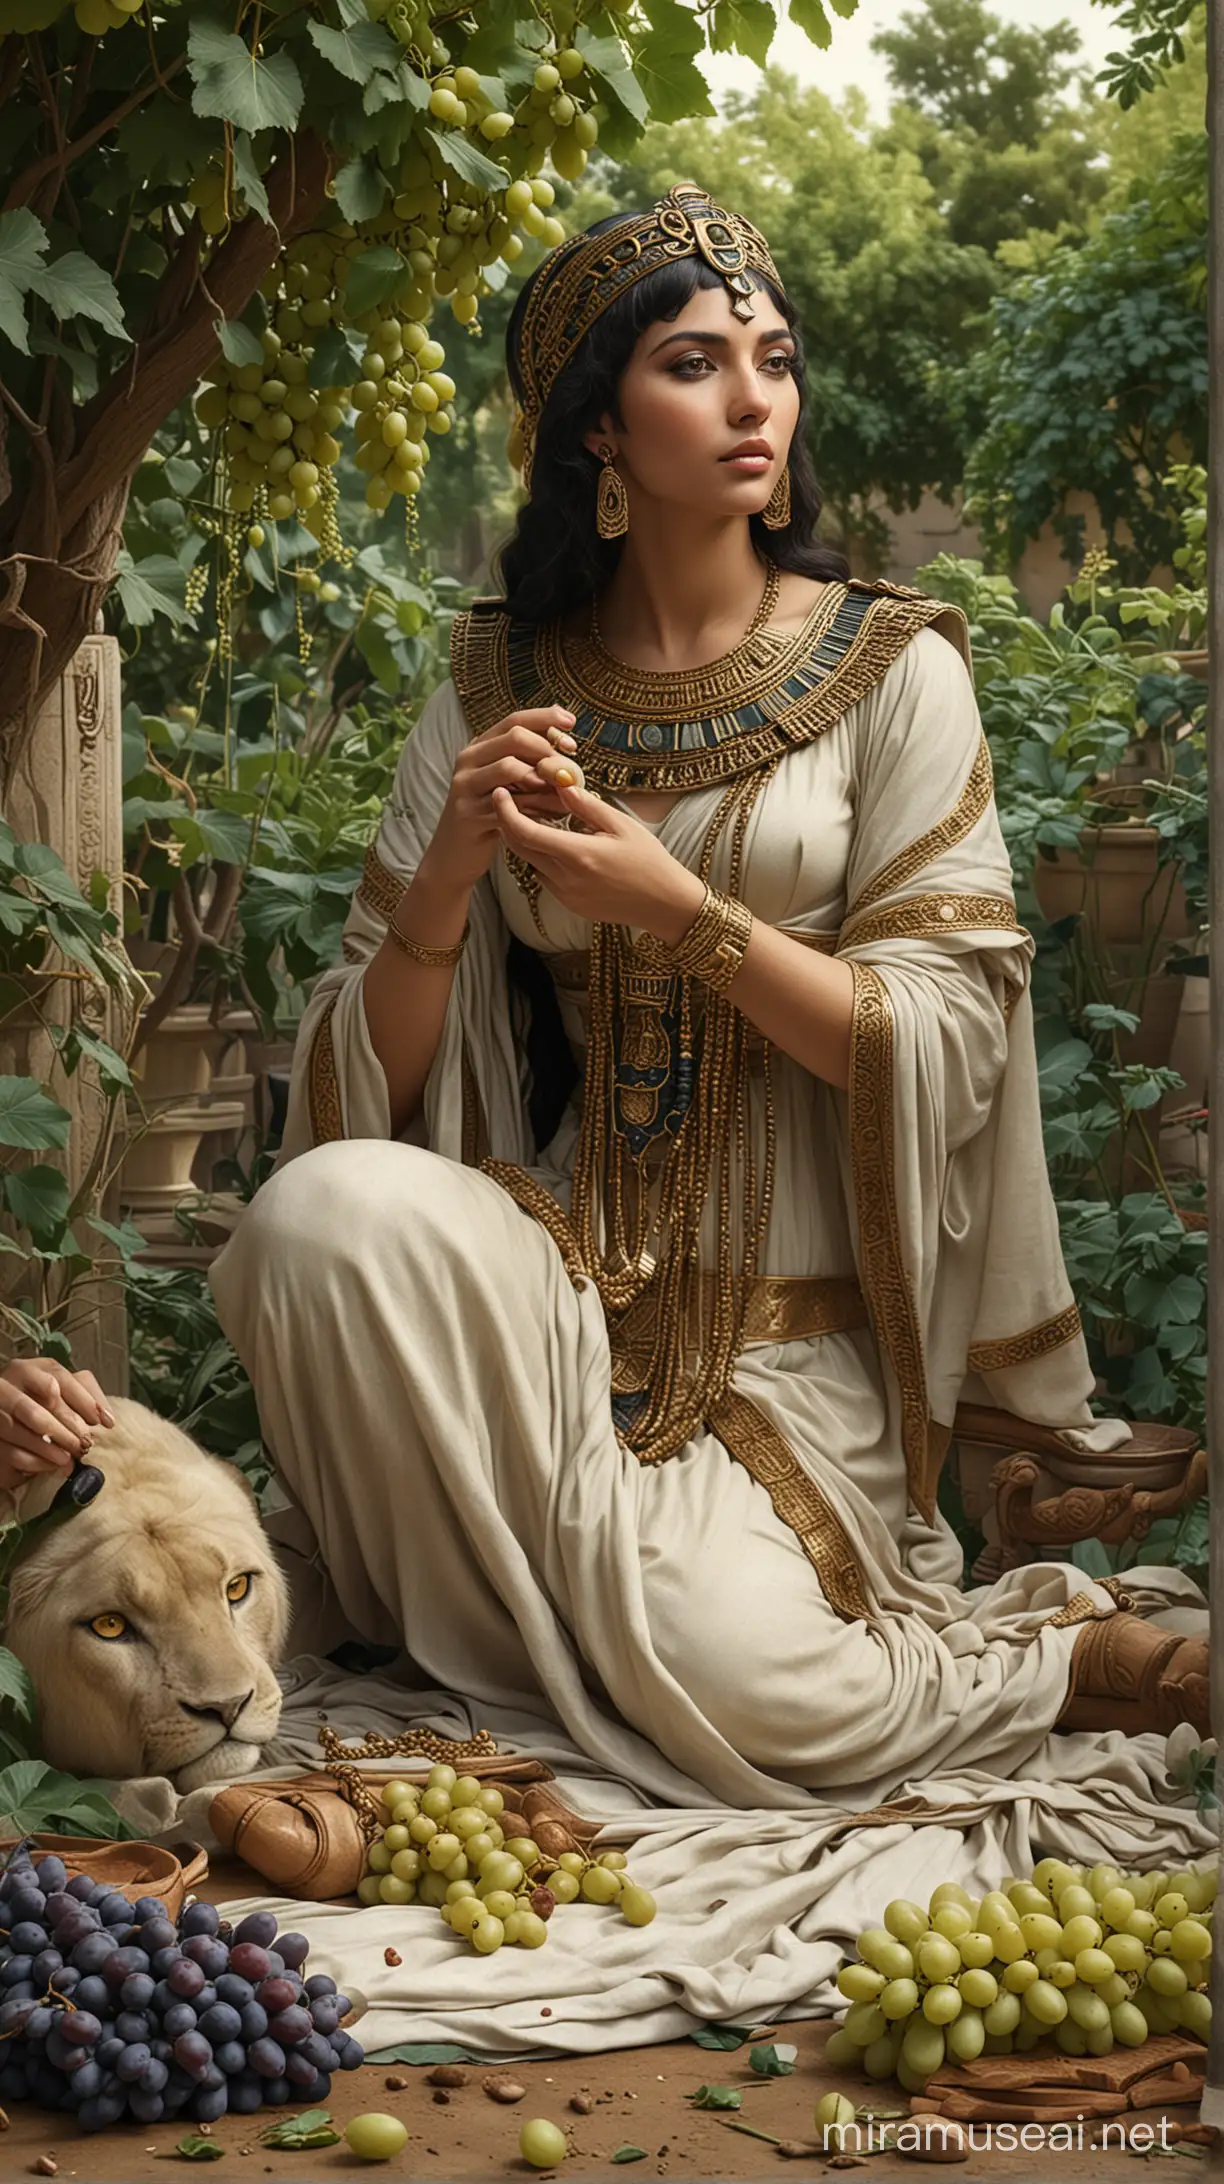 Cleopatra Enjoying Grapes in Luxurious Garden Setting with Attendant Servants